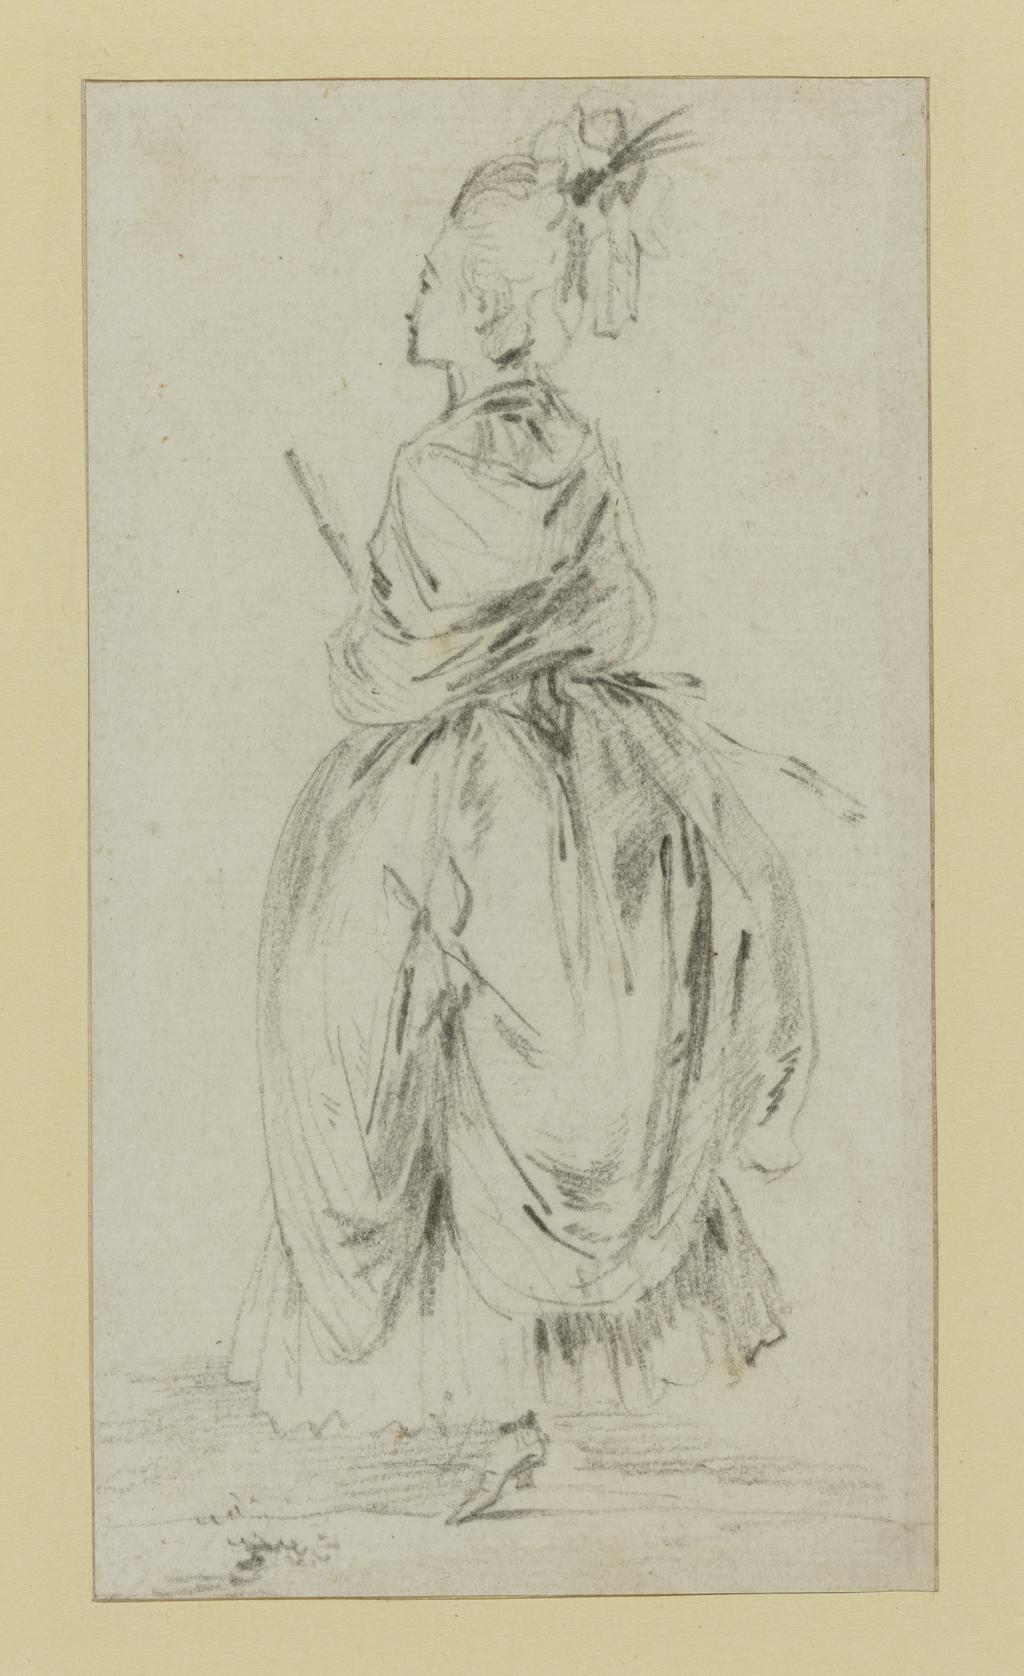 An image of A Lady, holding a fan, turned towards the left. Saint-Aubin, Gabriel Jacques de (French, 1724-1780). Black chalk on paper, height 162 mm, width 90 mm.